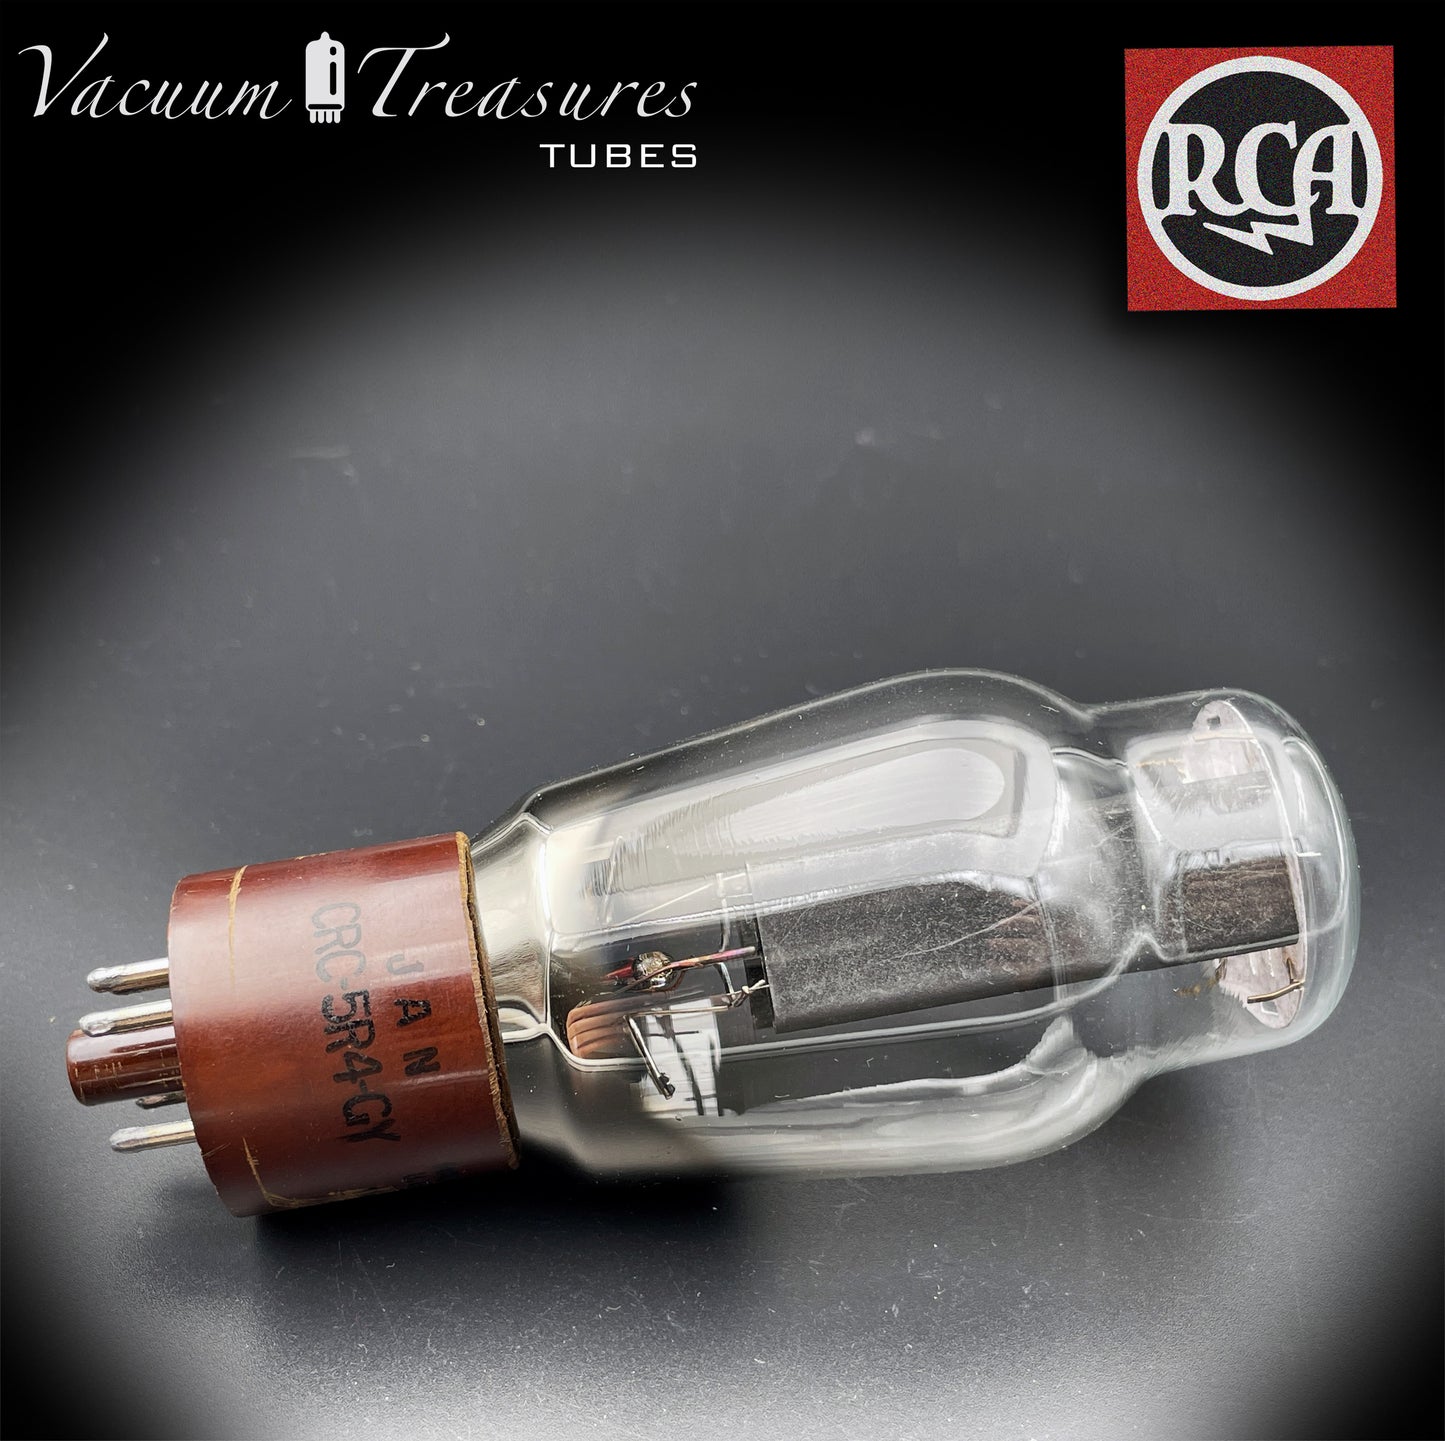 5R4GY JAN ( CV717 ) RCA Black Plates Dual Bottom Square Getter Tested Tube Rectifier Made in USA '45